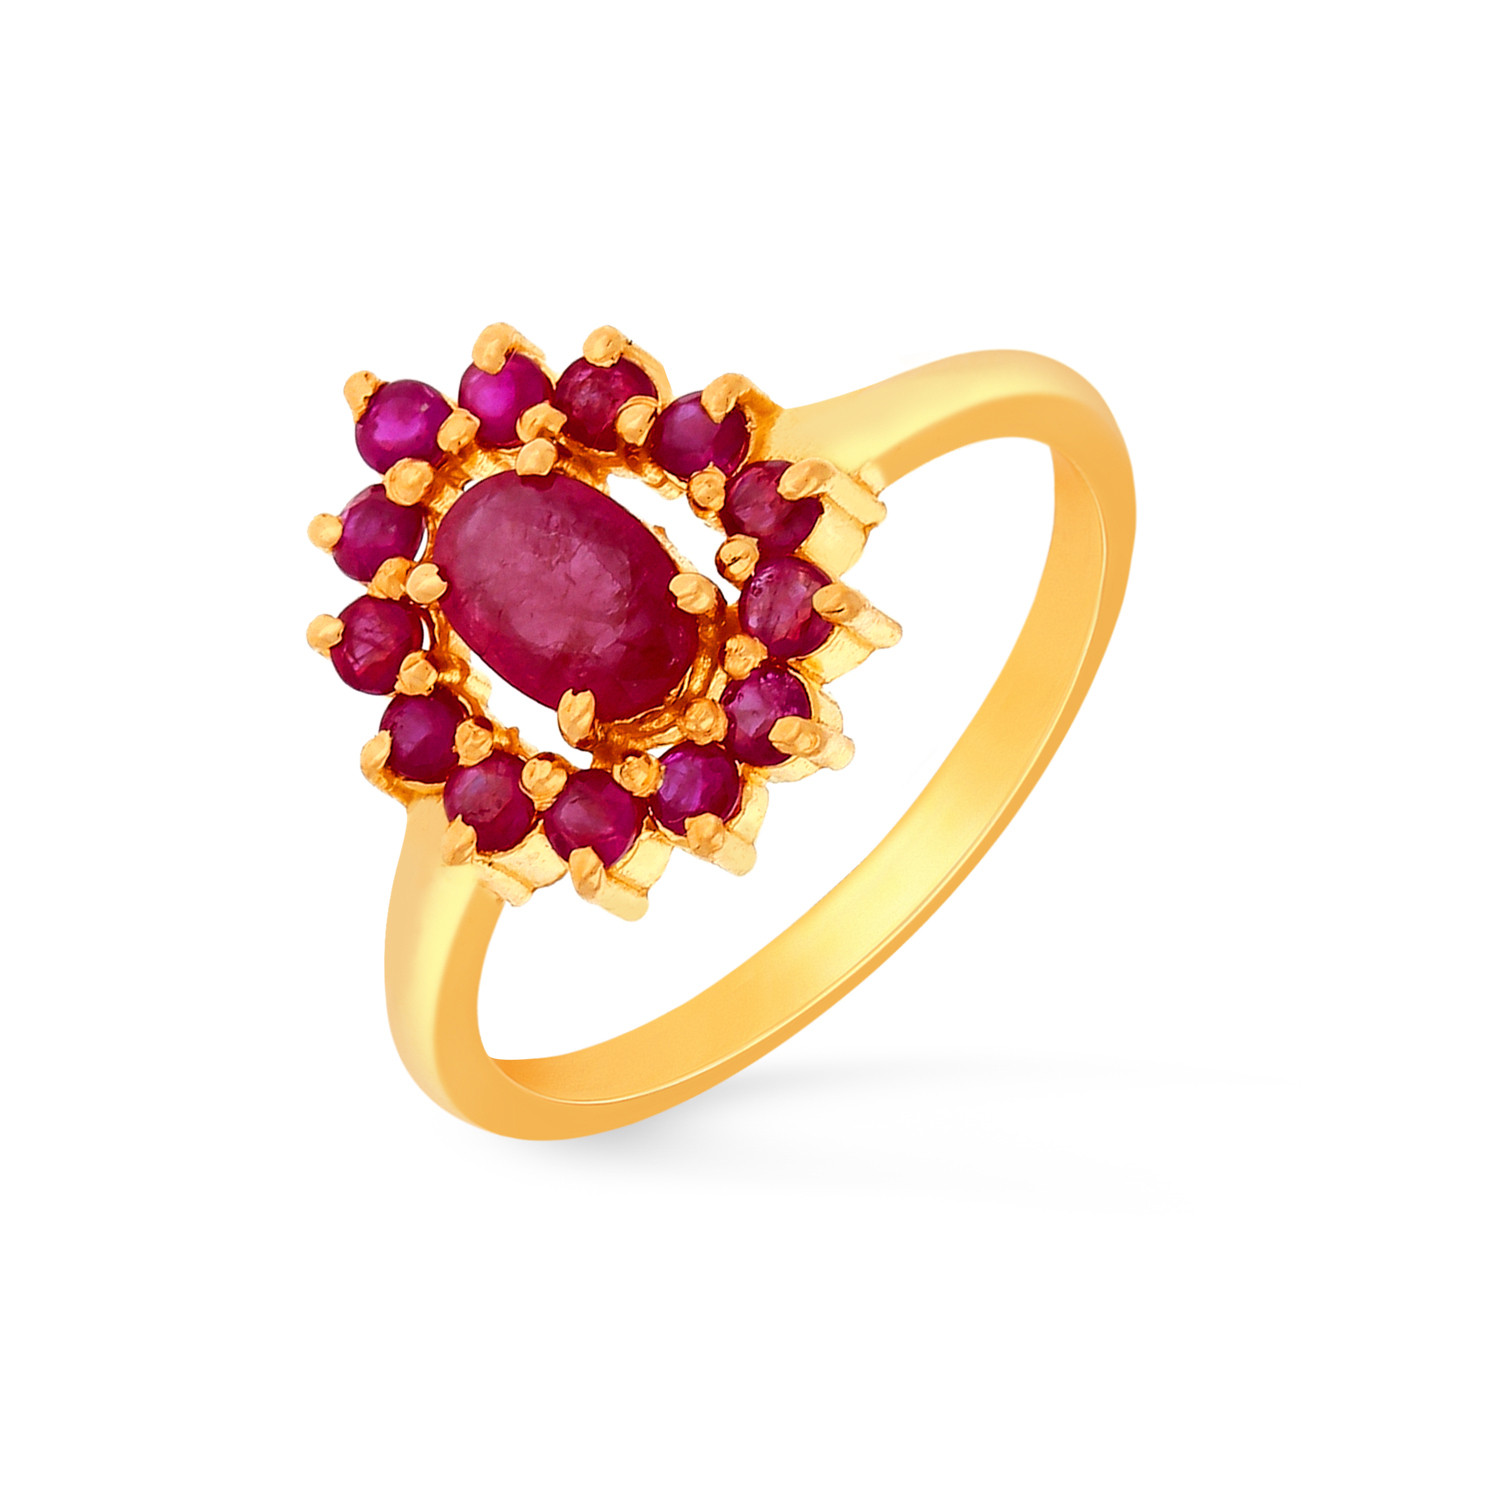 Real Red Ruby Jewelry in San Diego | CJ Charles